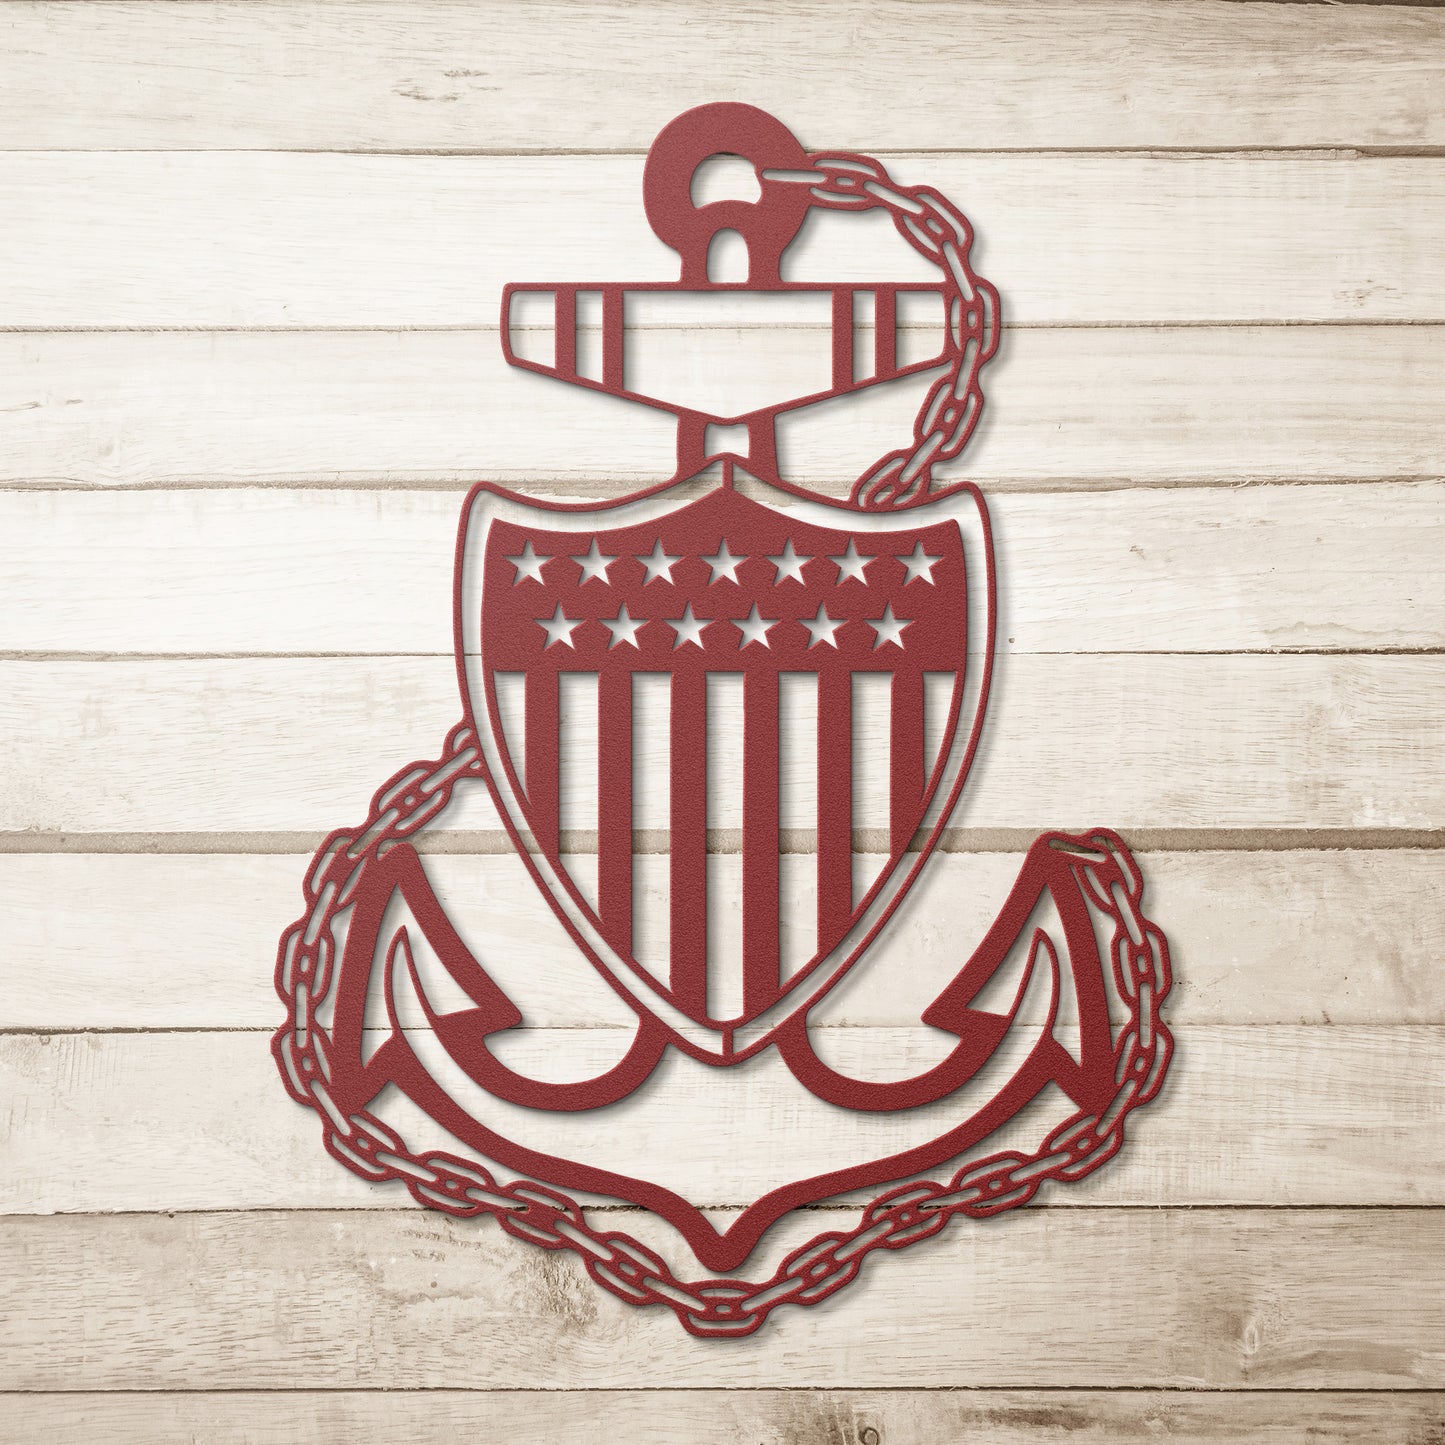 USCG Stability and Security Anchor Symbol Metal Wall Art